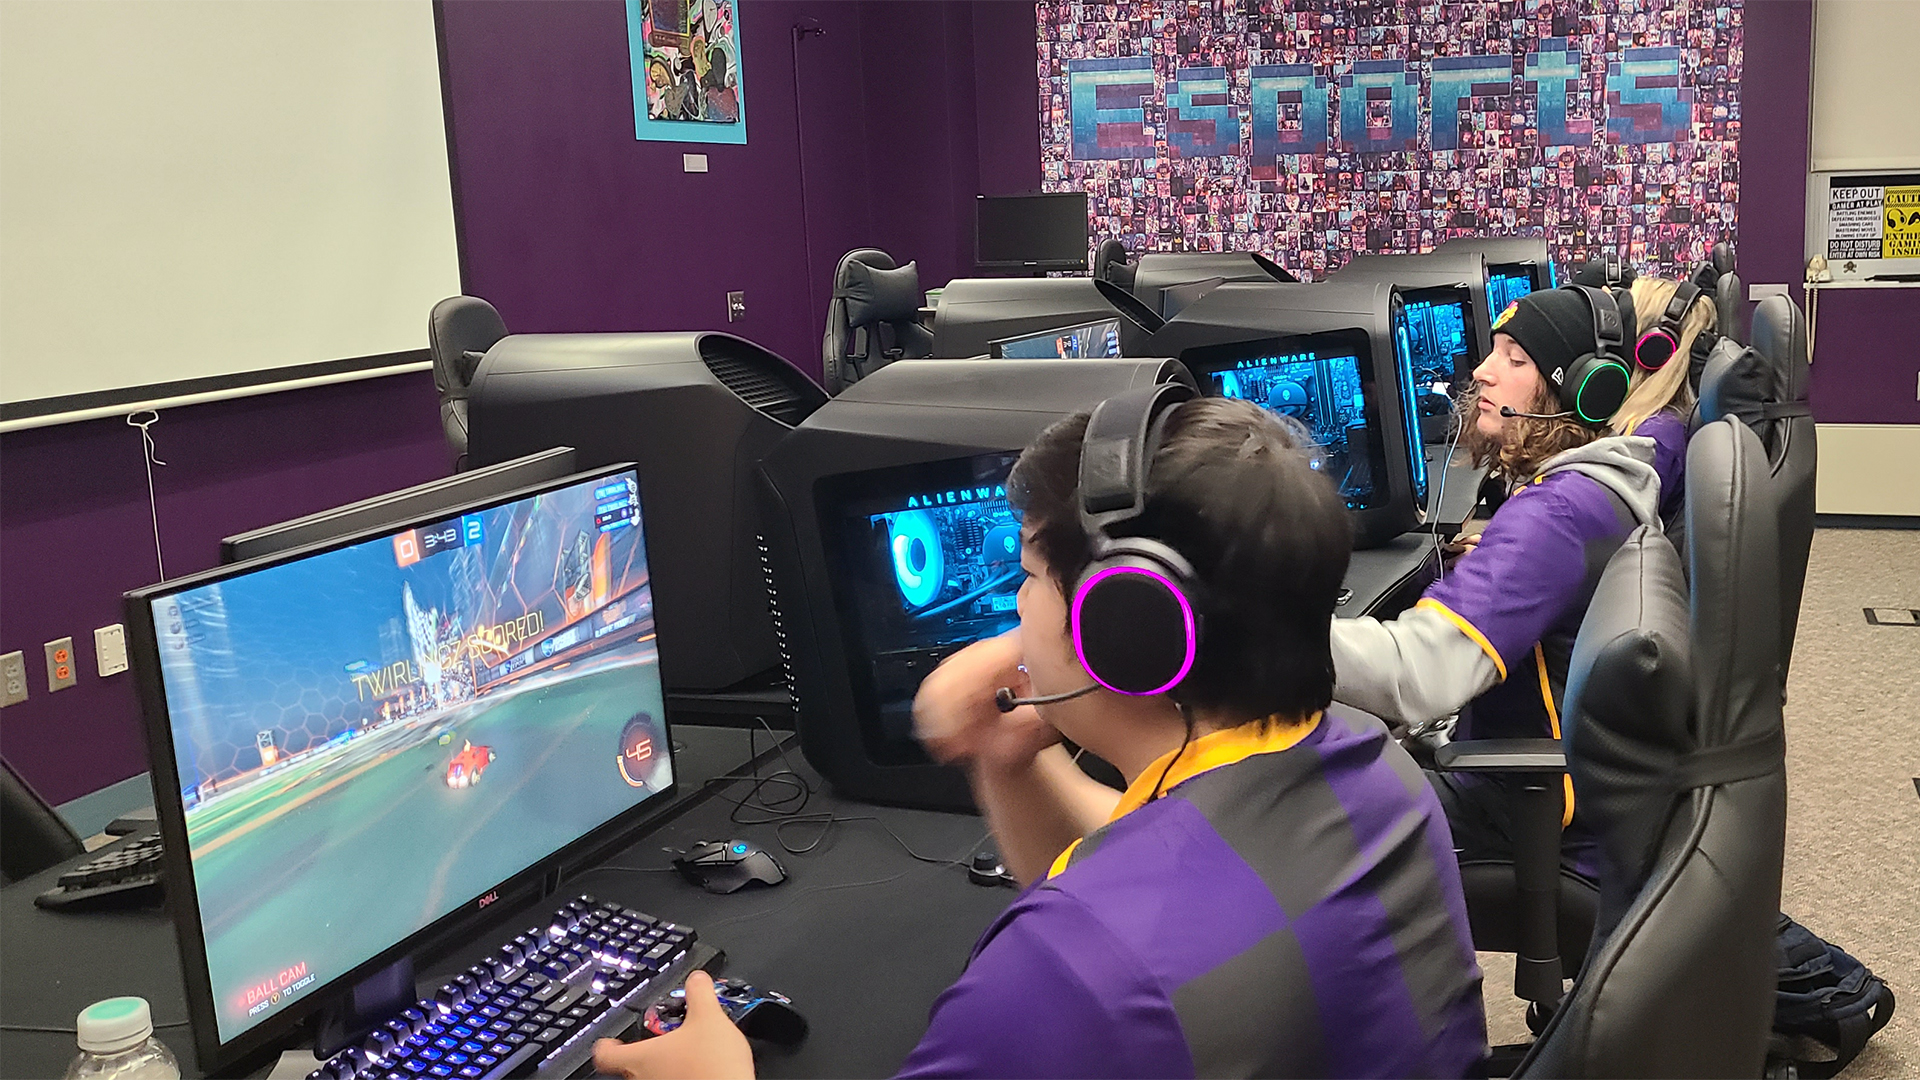 The team competing inside the esports facility. Photo by Karina Graziani.